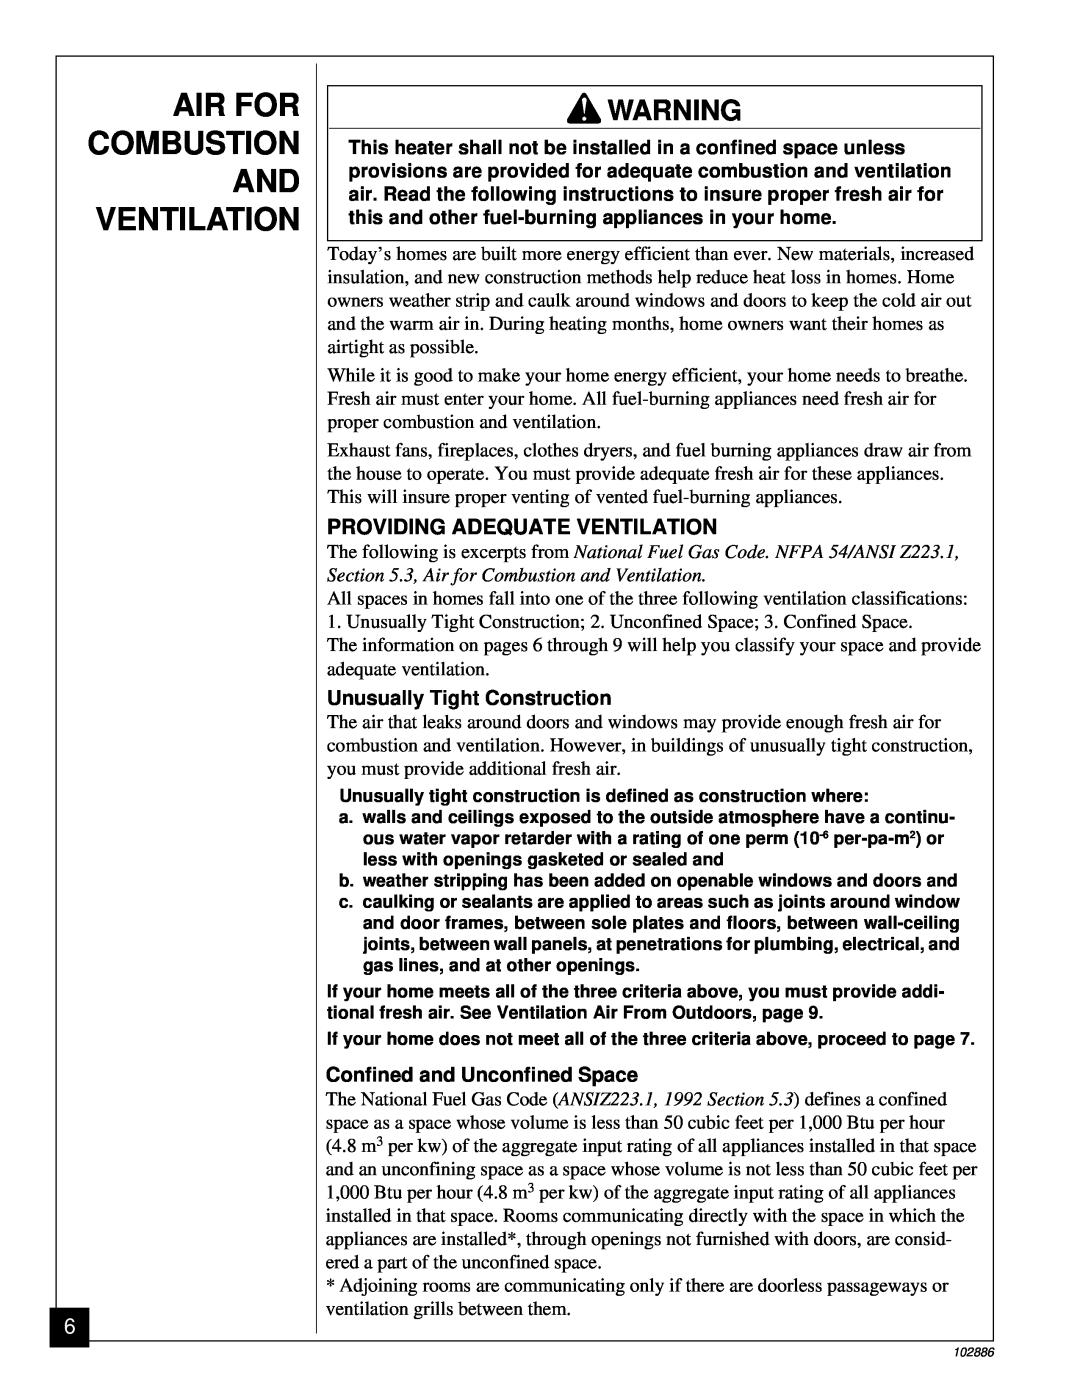 Vanguard Heating VMH26TPB installation manual Air For Combustion And Ventilation, Providing Adequate Ventilation 